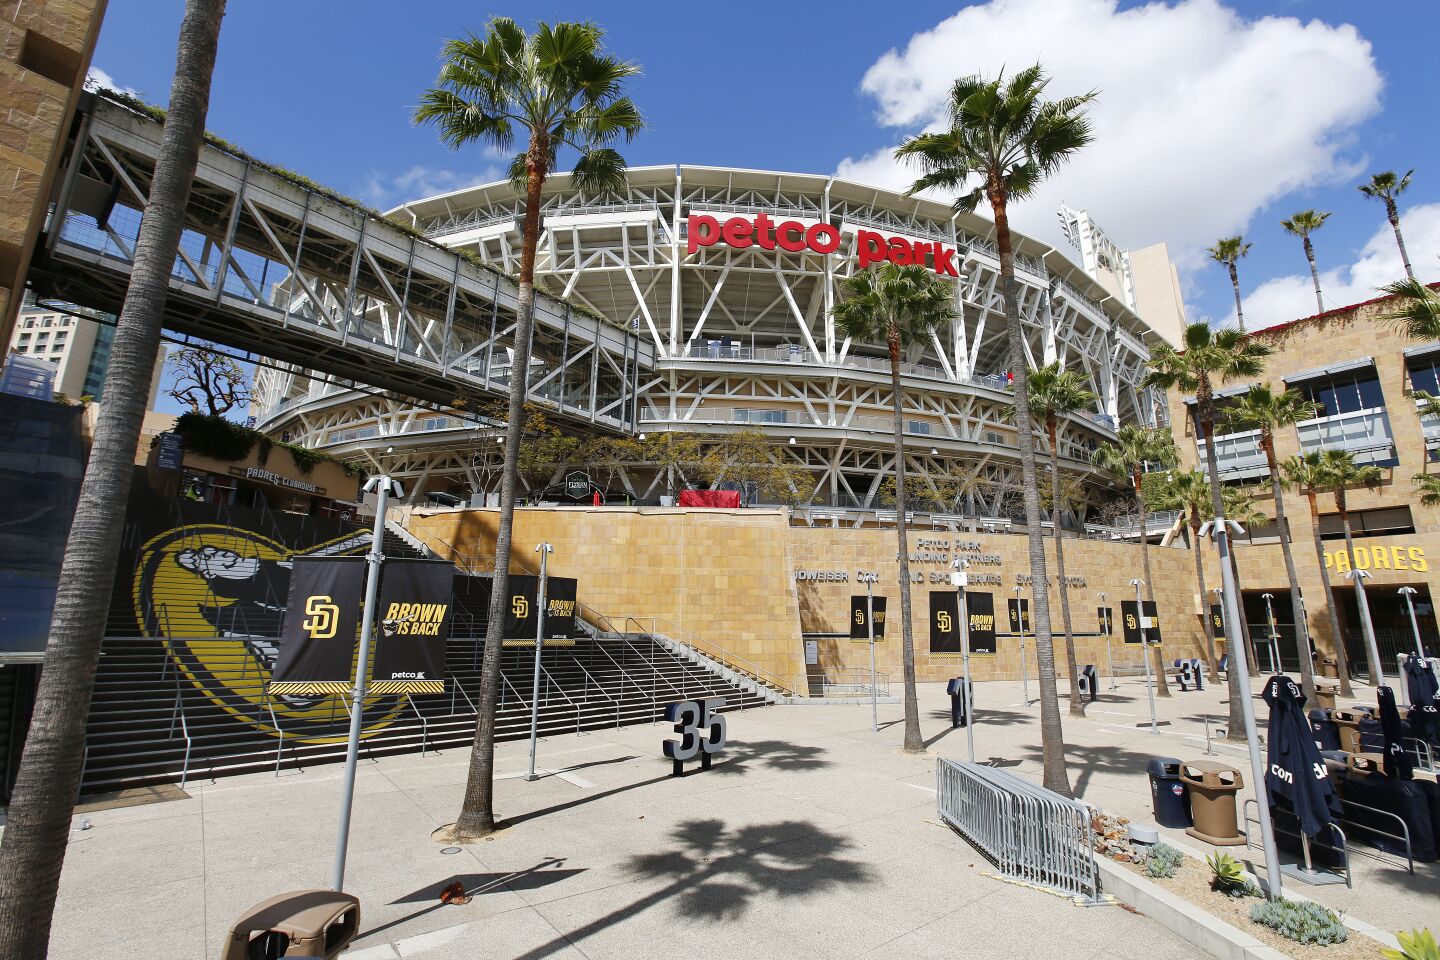 Petco Park on what was supposed to be opening day for the Padres on March 26, 2020. Major League Baseball has postponed games due to coronavirus.